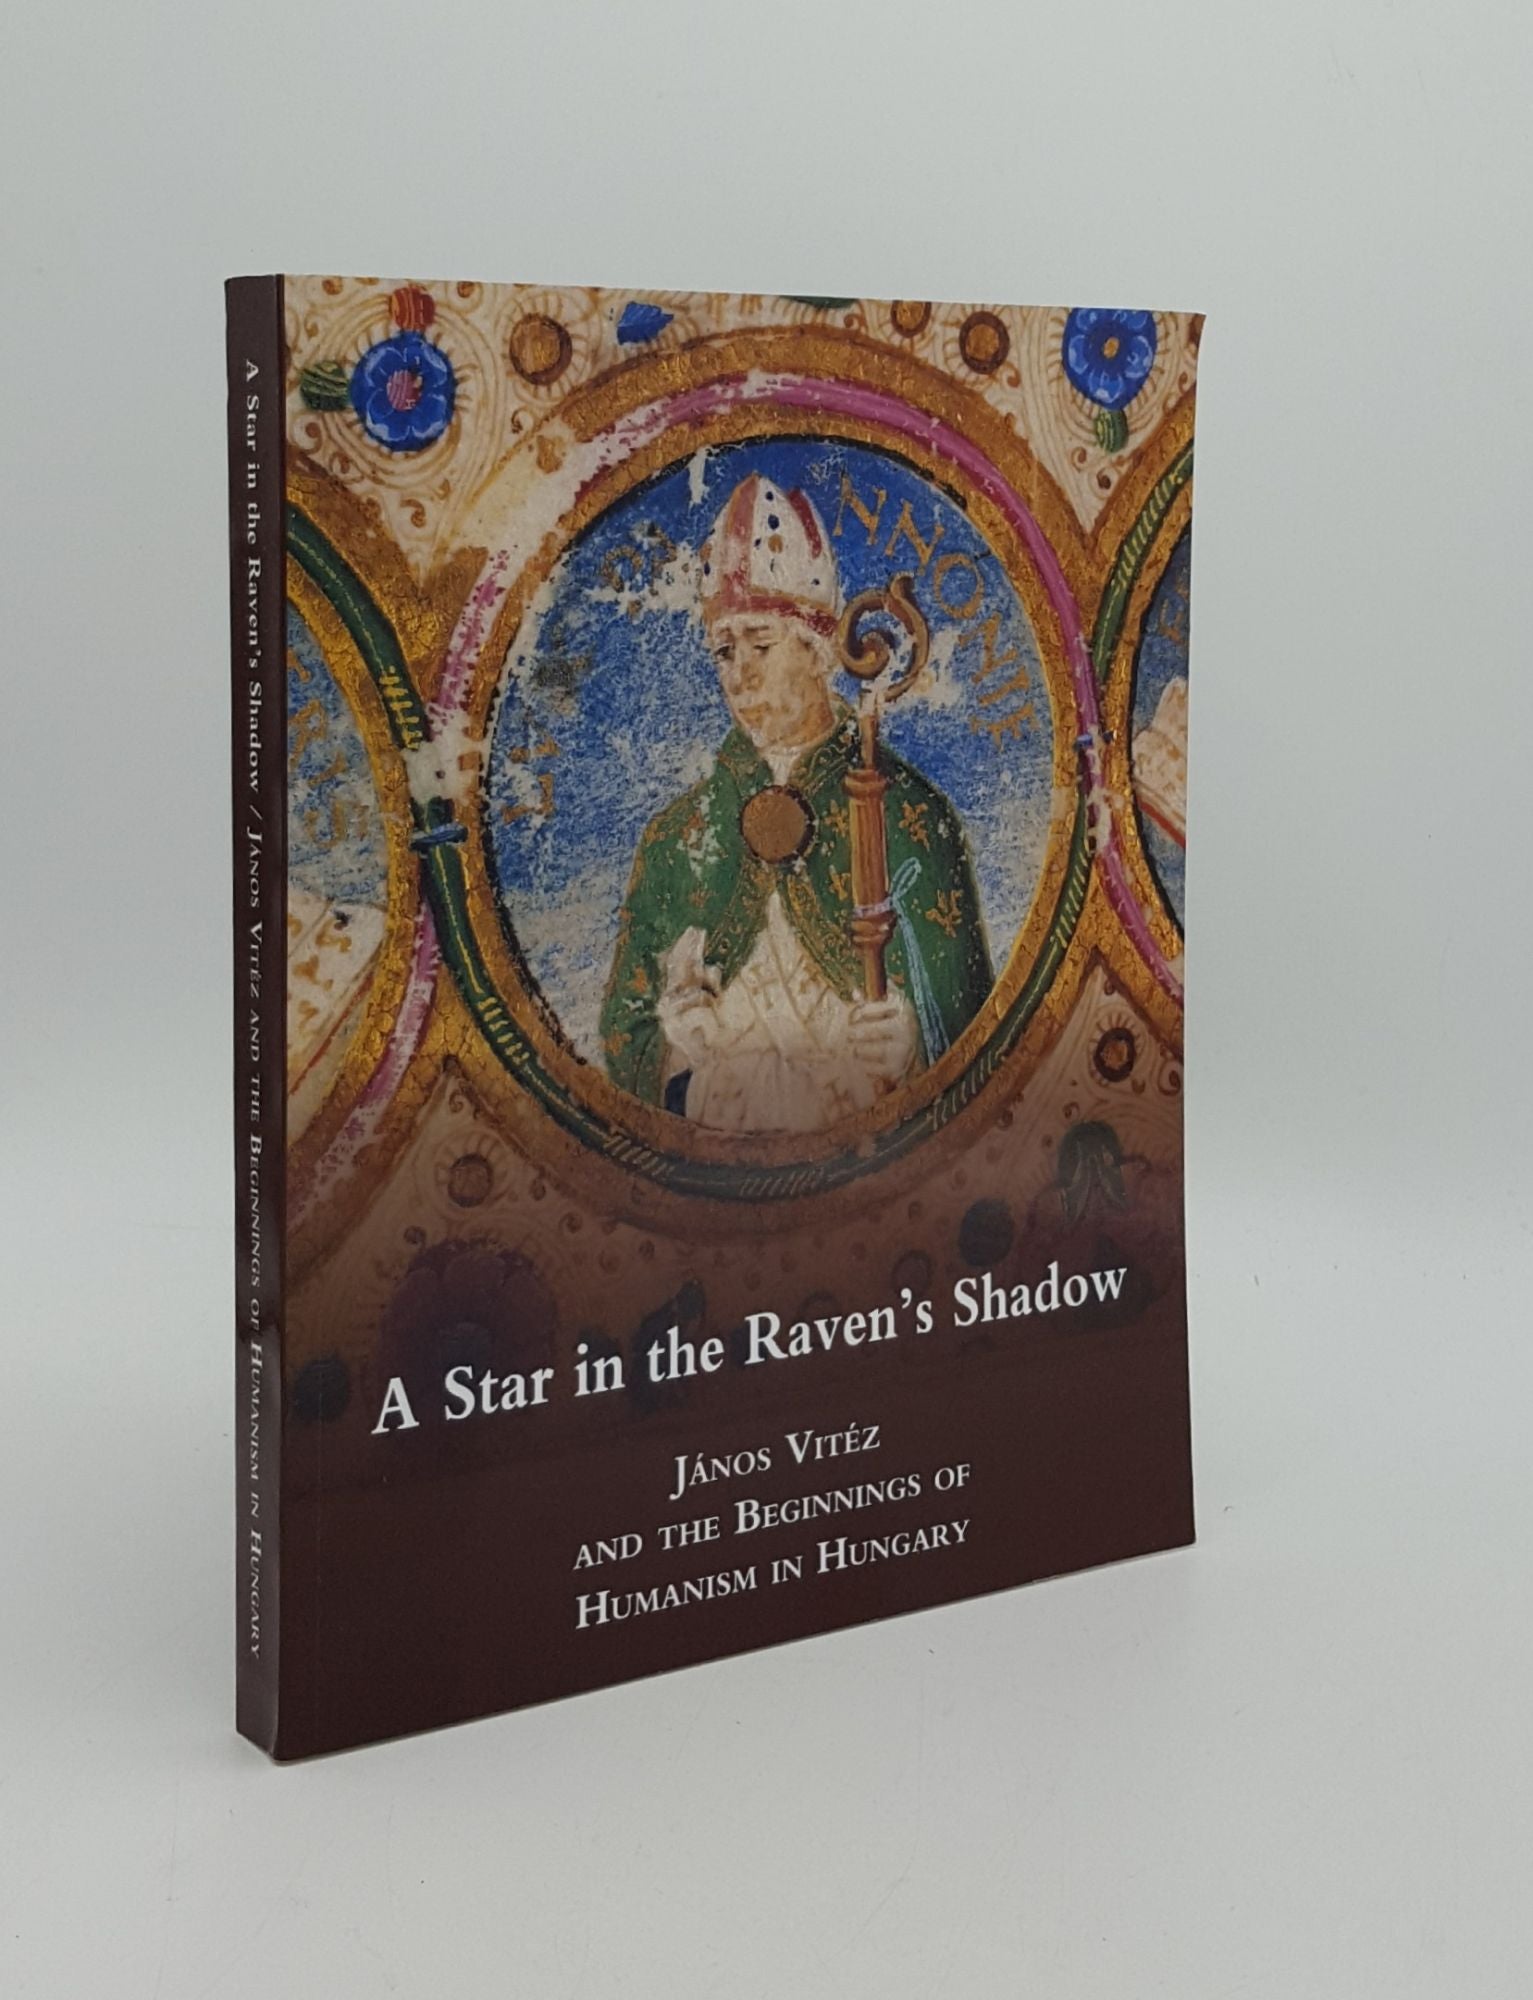 MONOK Istvan, TIMAR Eszter - A Star in the Raven's Shadow Janos Vitez and the Beginnings of Humanism in Hungary